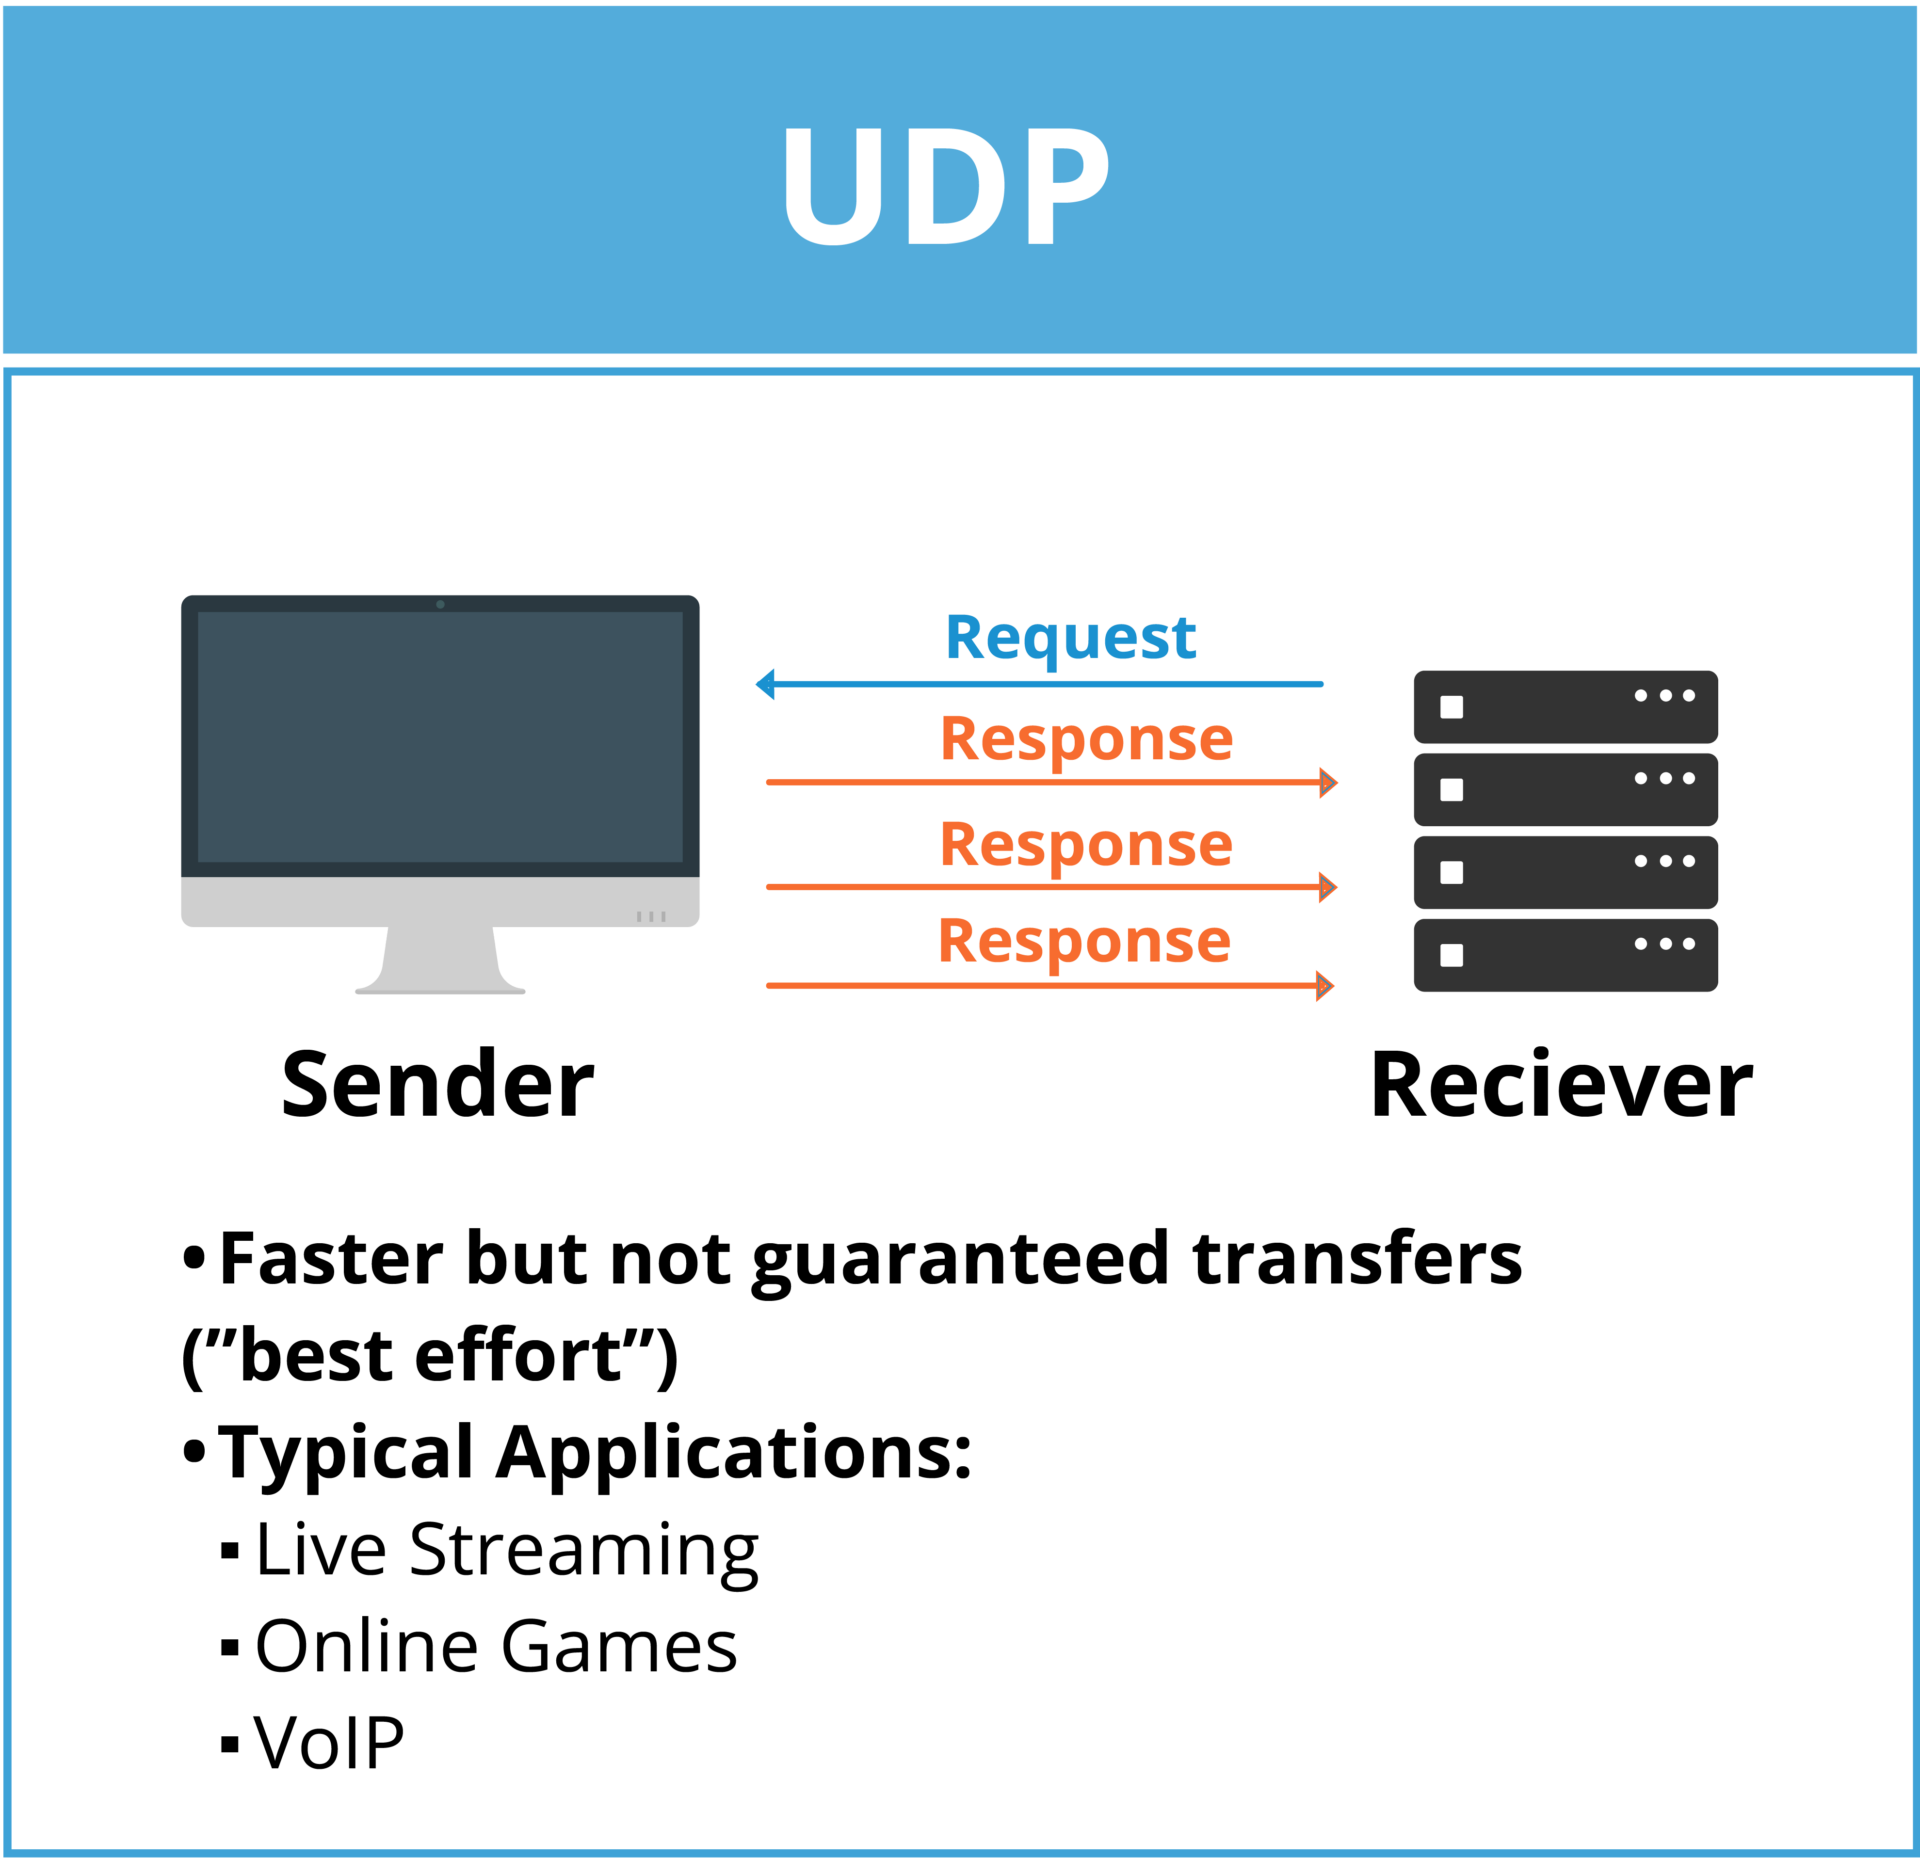 User Datagram Protocol
(UDP) graphic explaining that transfers with UDP are faster but not guaranteed